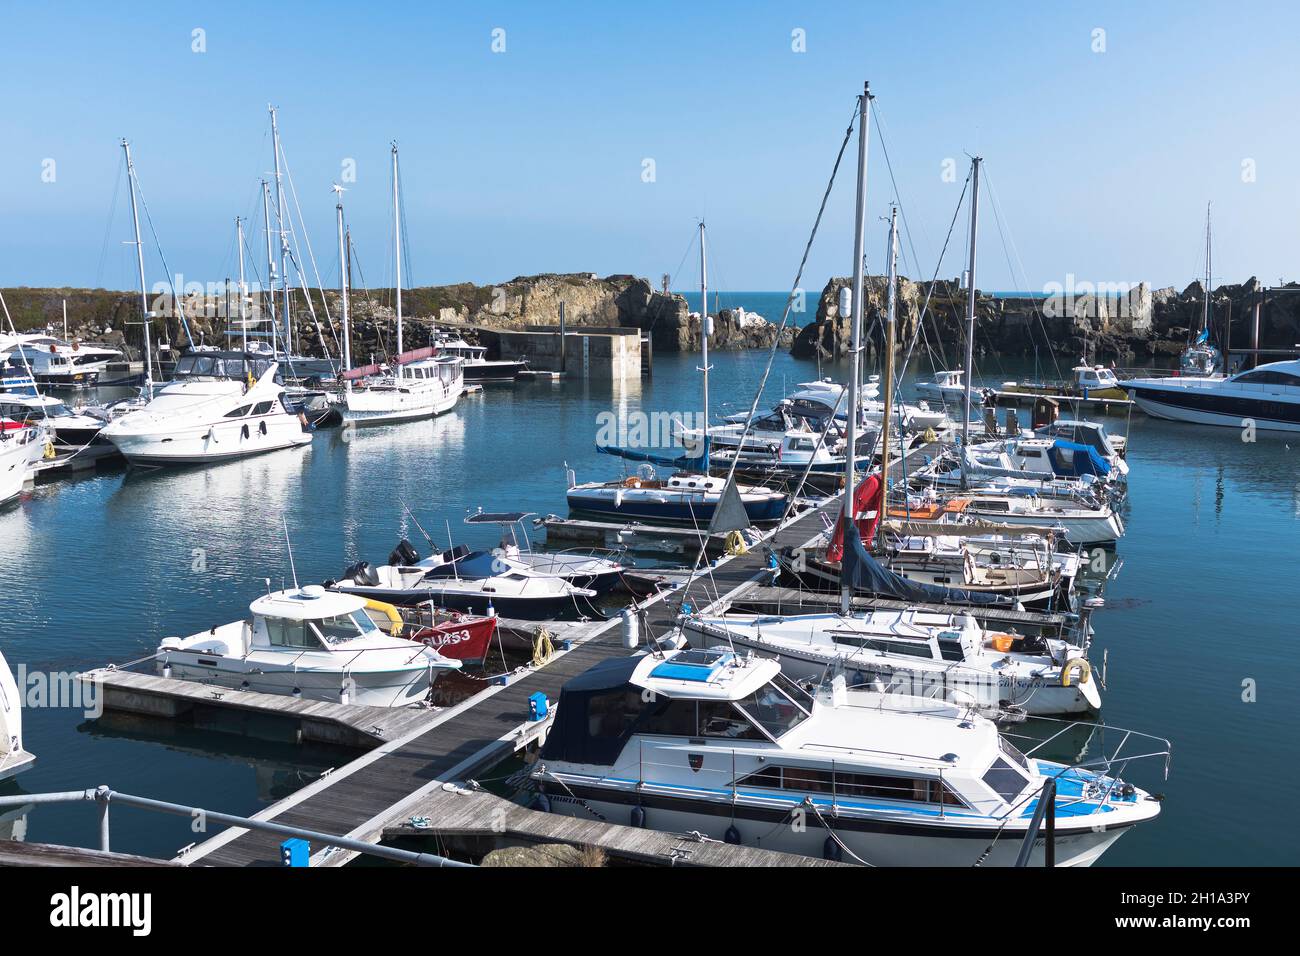 dh Beaucette Marina VALE GUERNSEY Yachts in harbour marinas boats yacht harbor Stock Photo